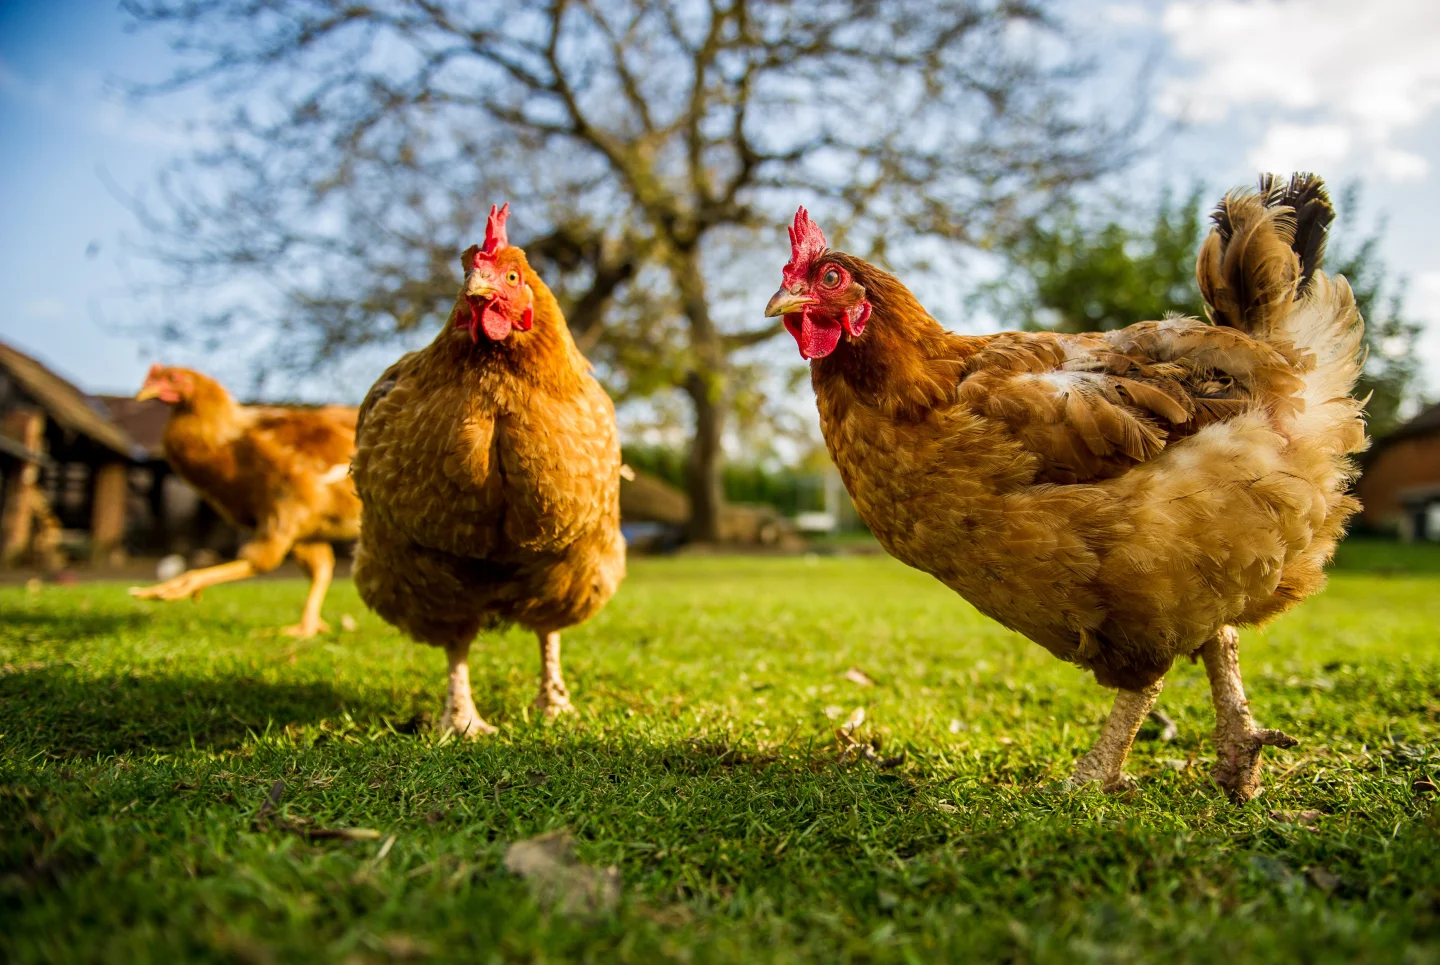 chicken-or-hen-on-a-green-meadow-picture-id1217649450